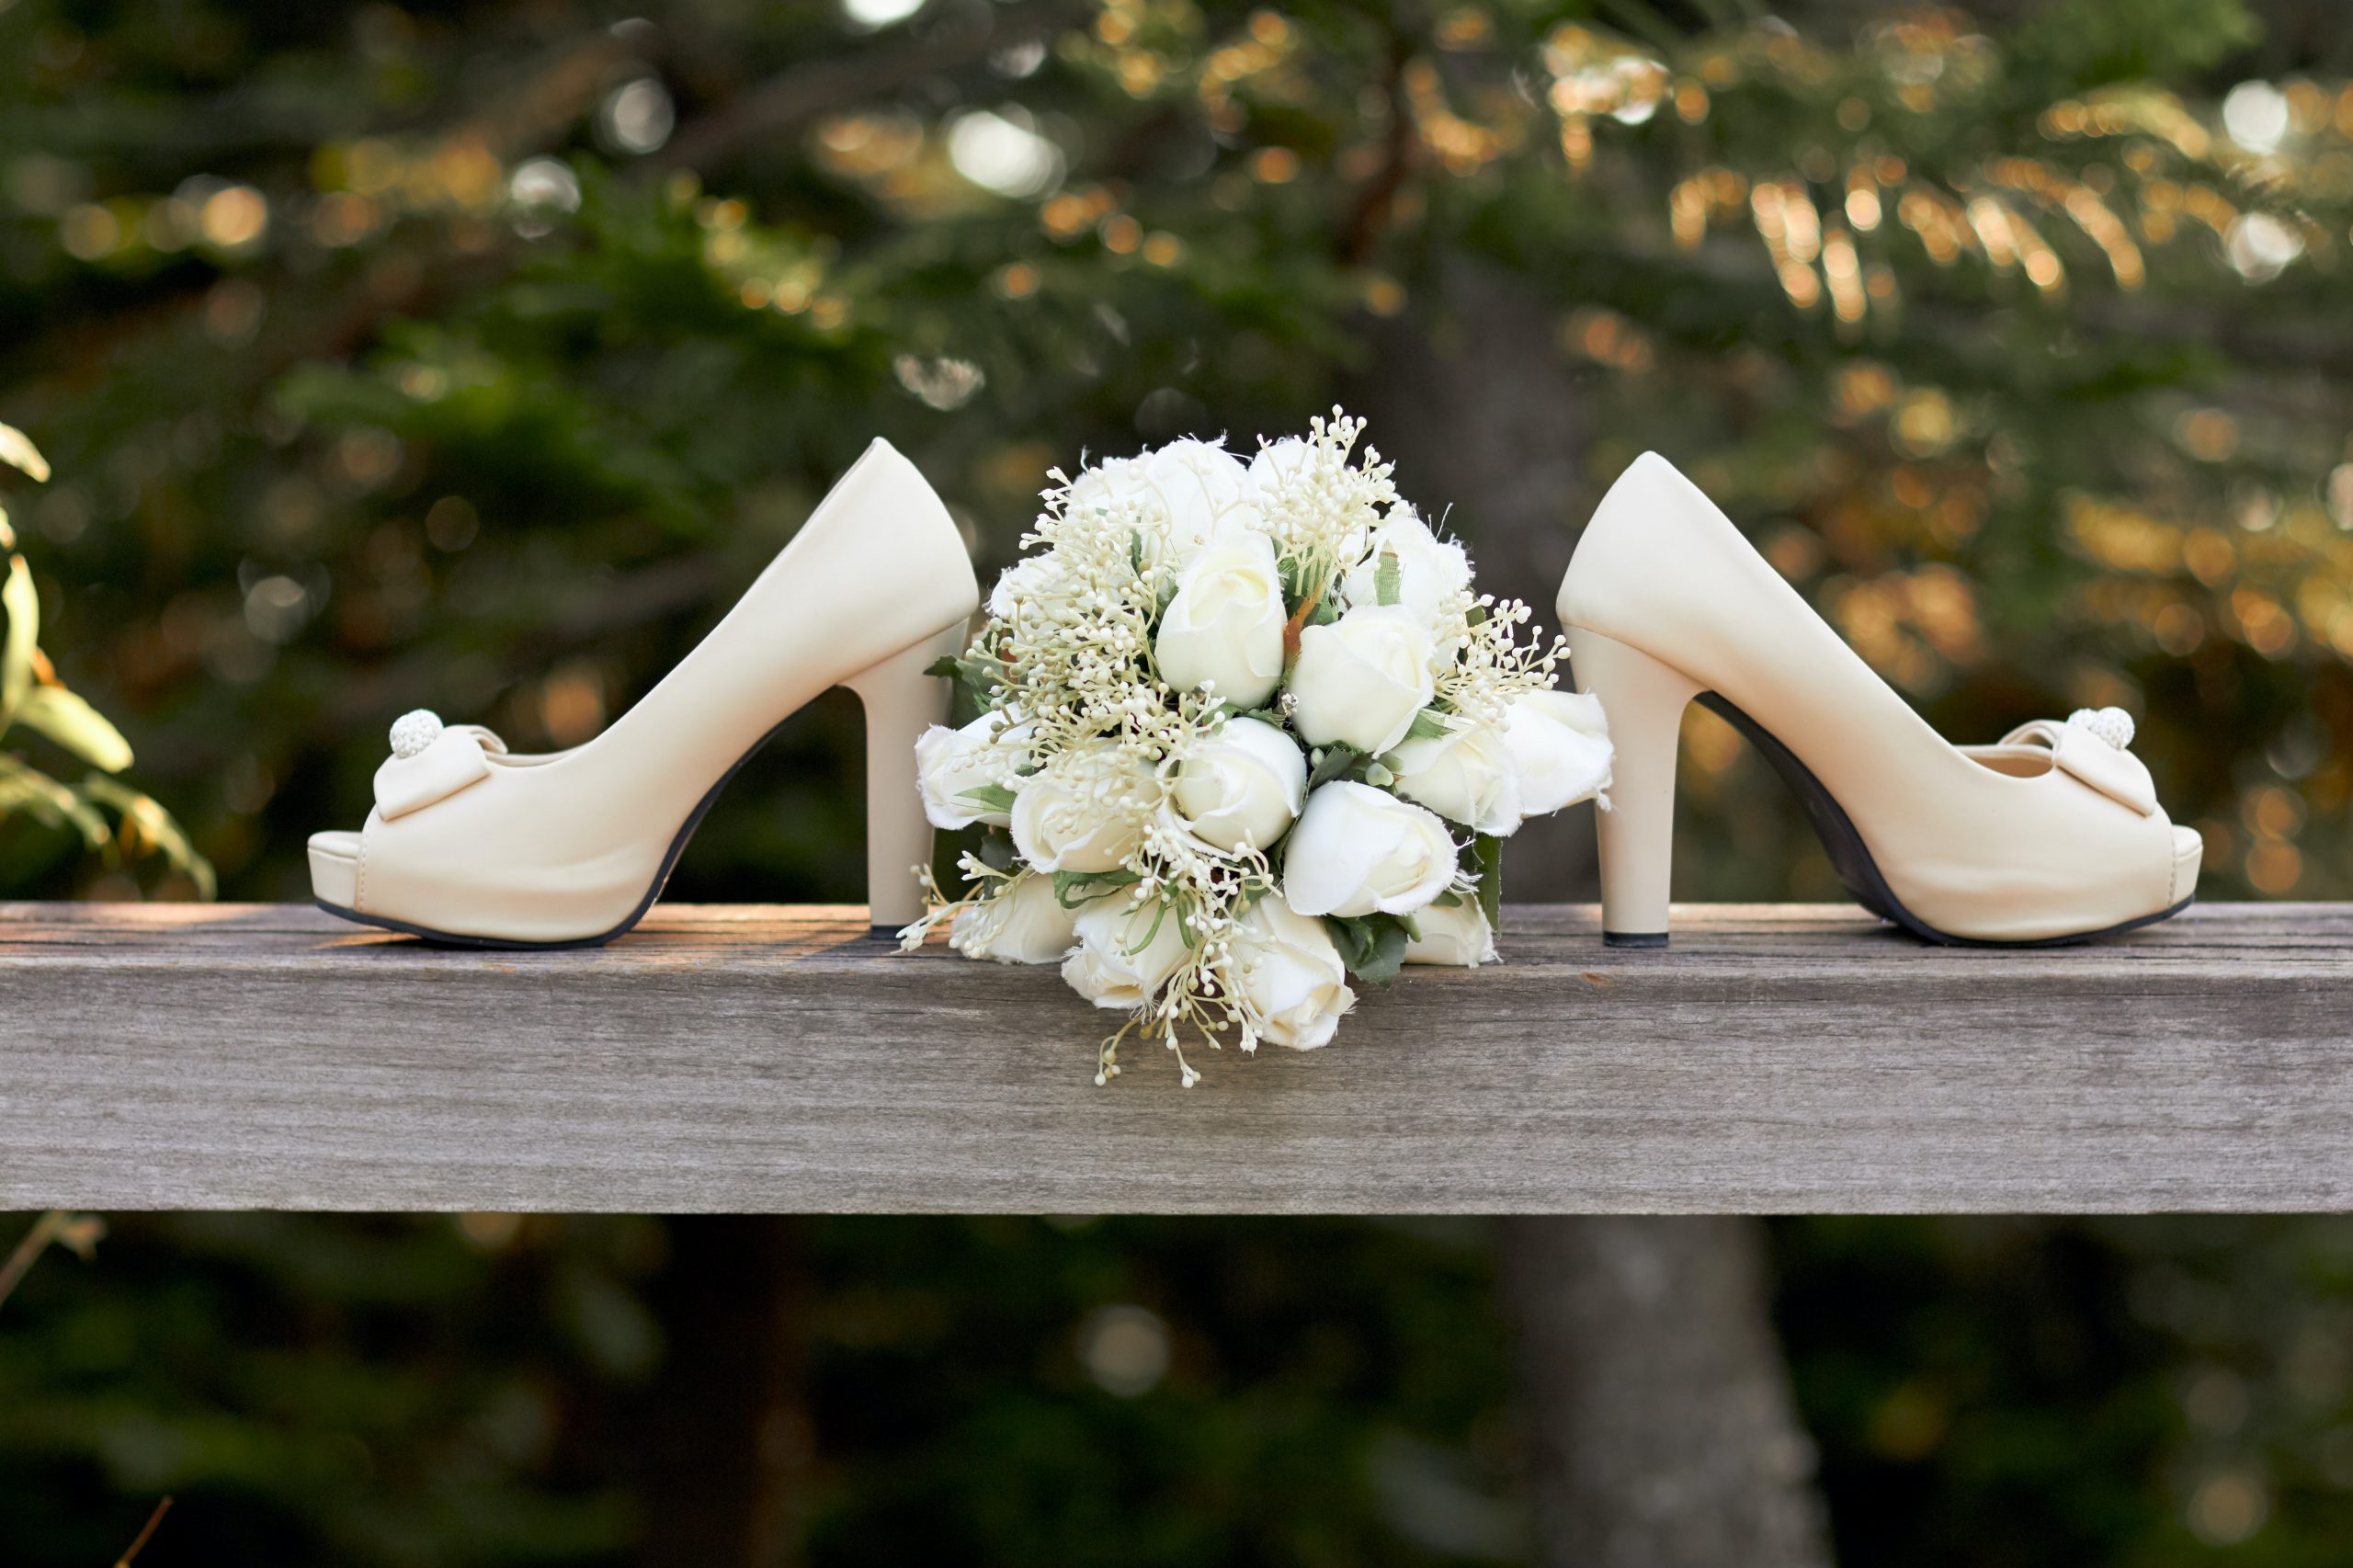 Designer bridal shoes to match your wedding style